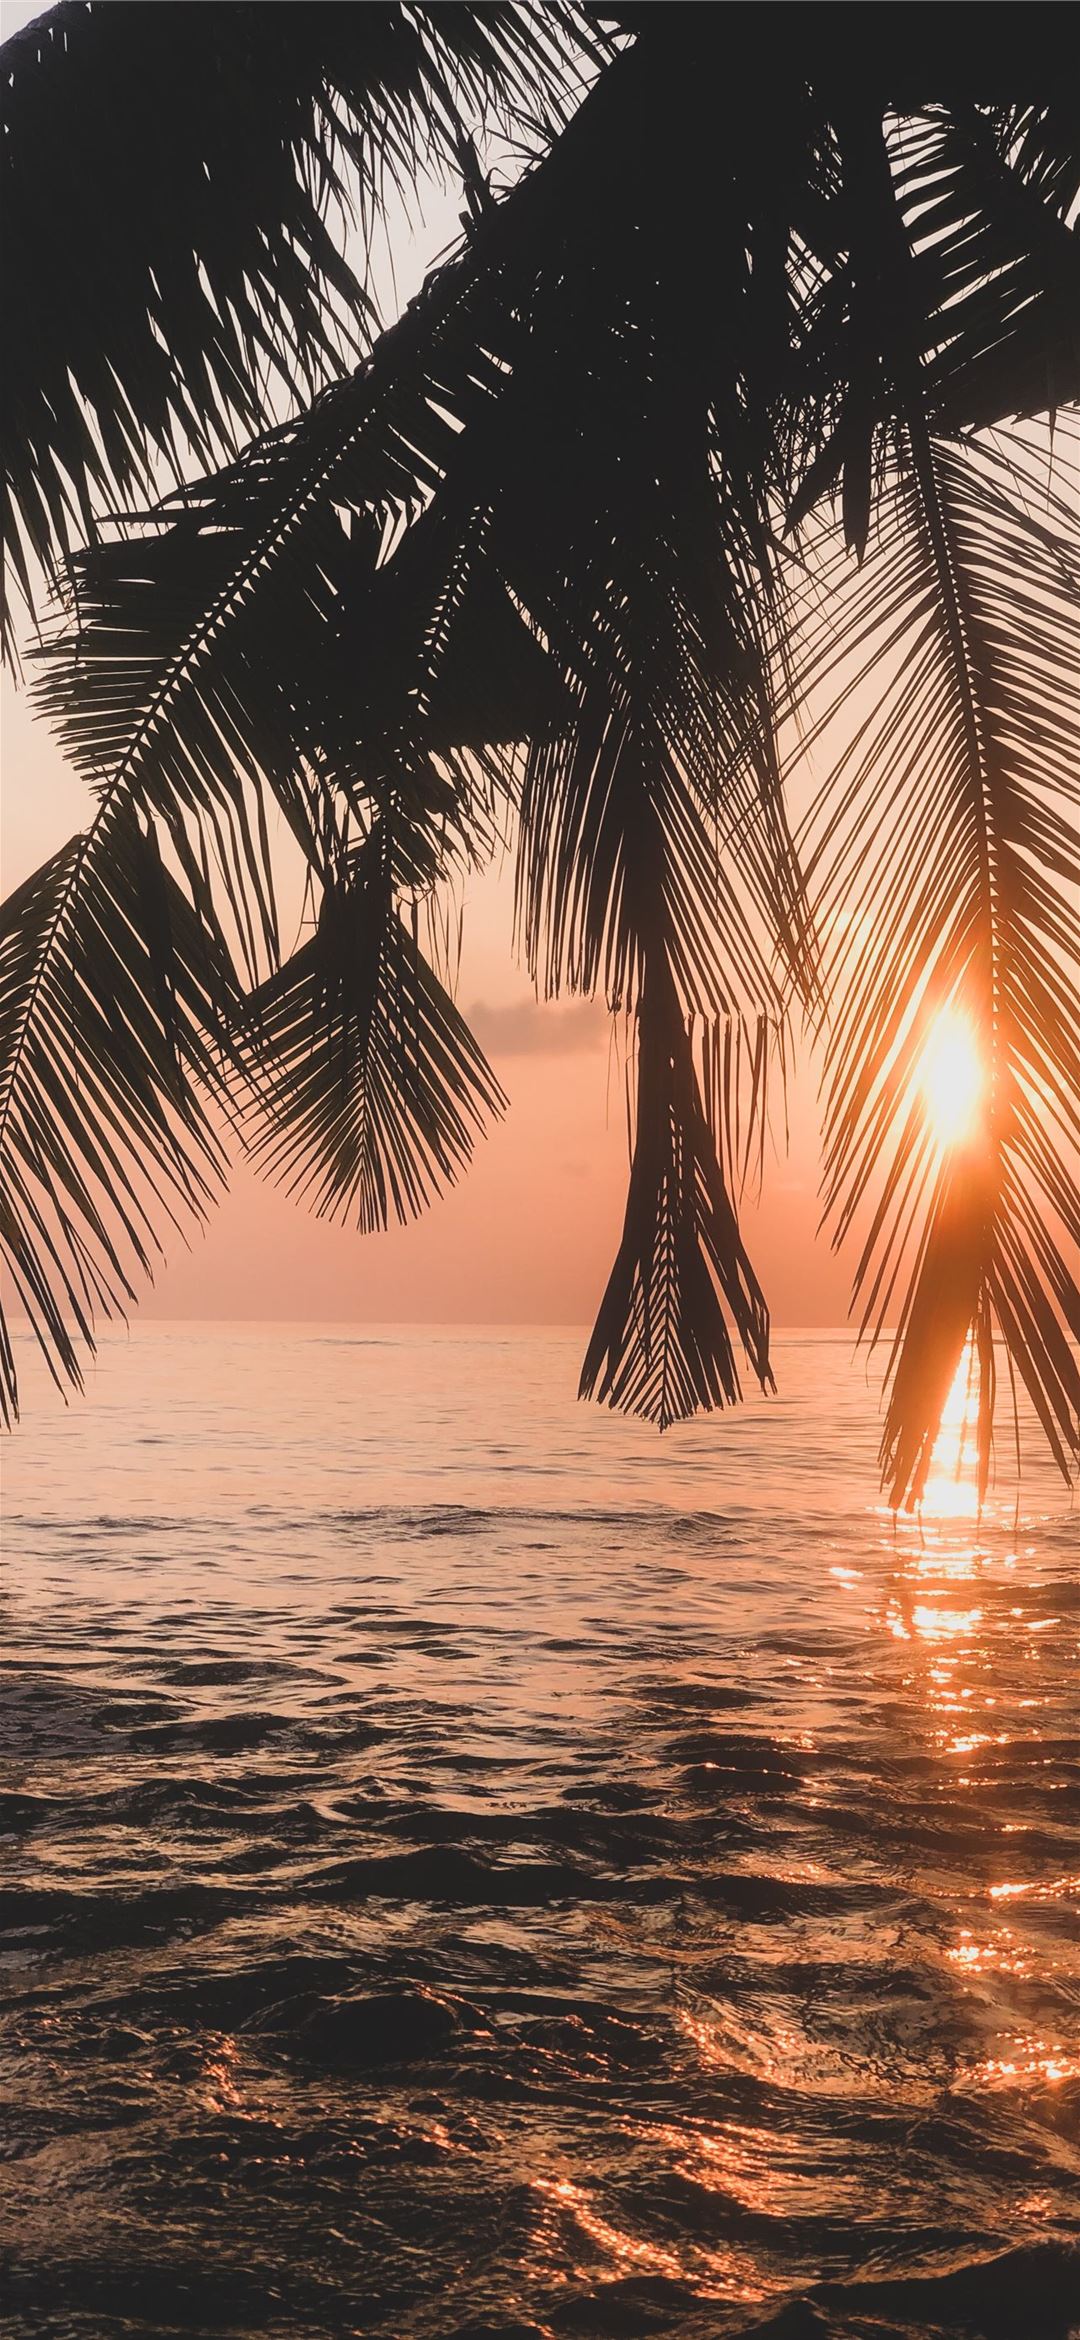 palm tree near body of water during sunset iPhone Wallpaper Free Download